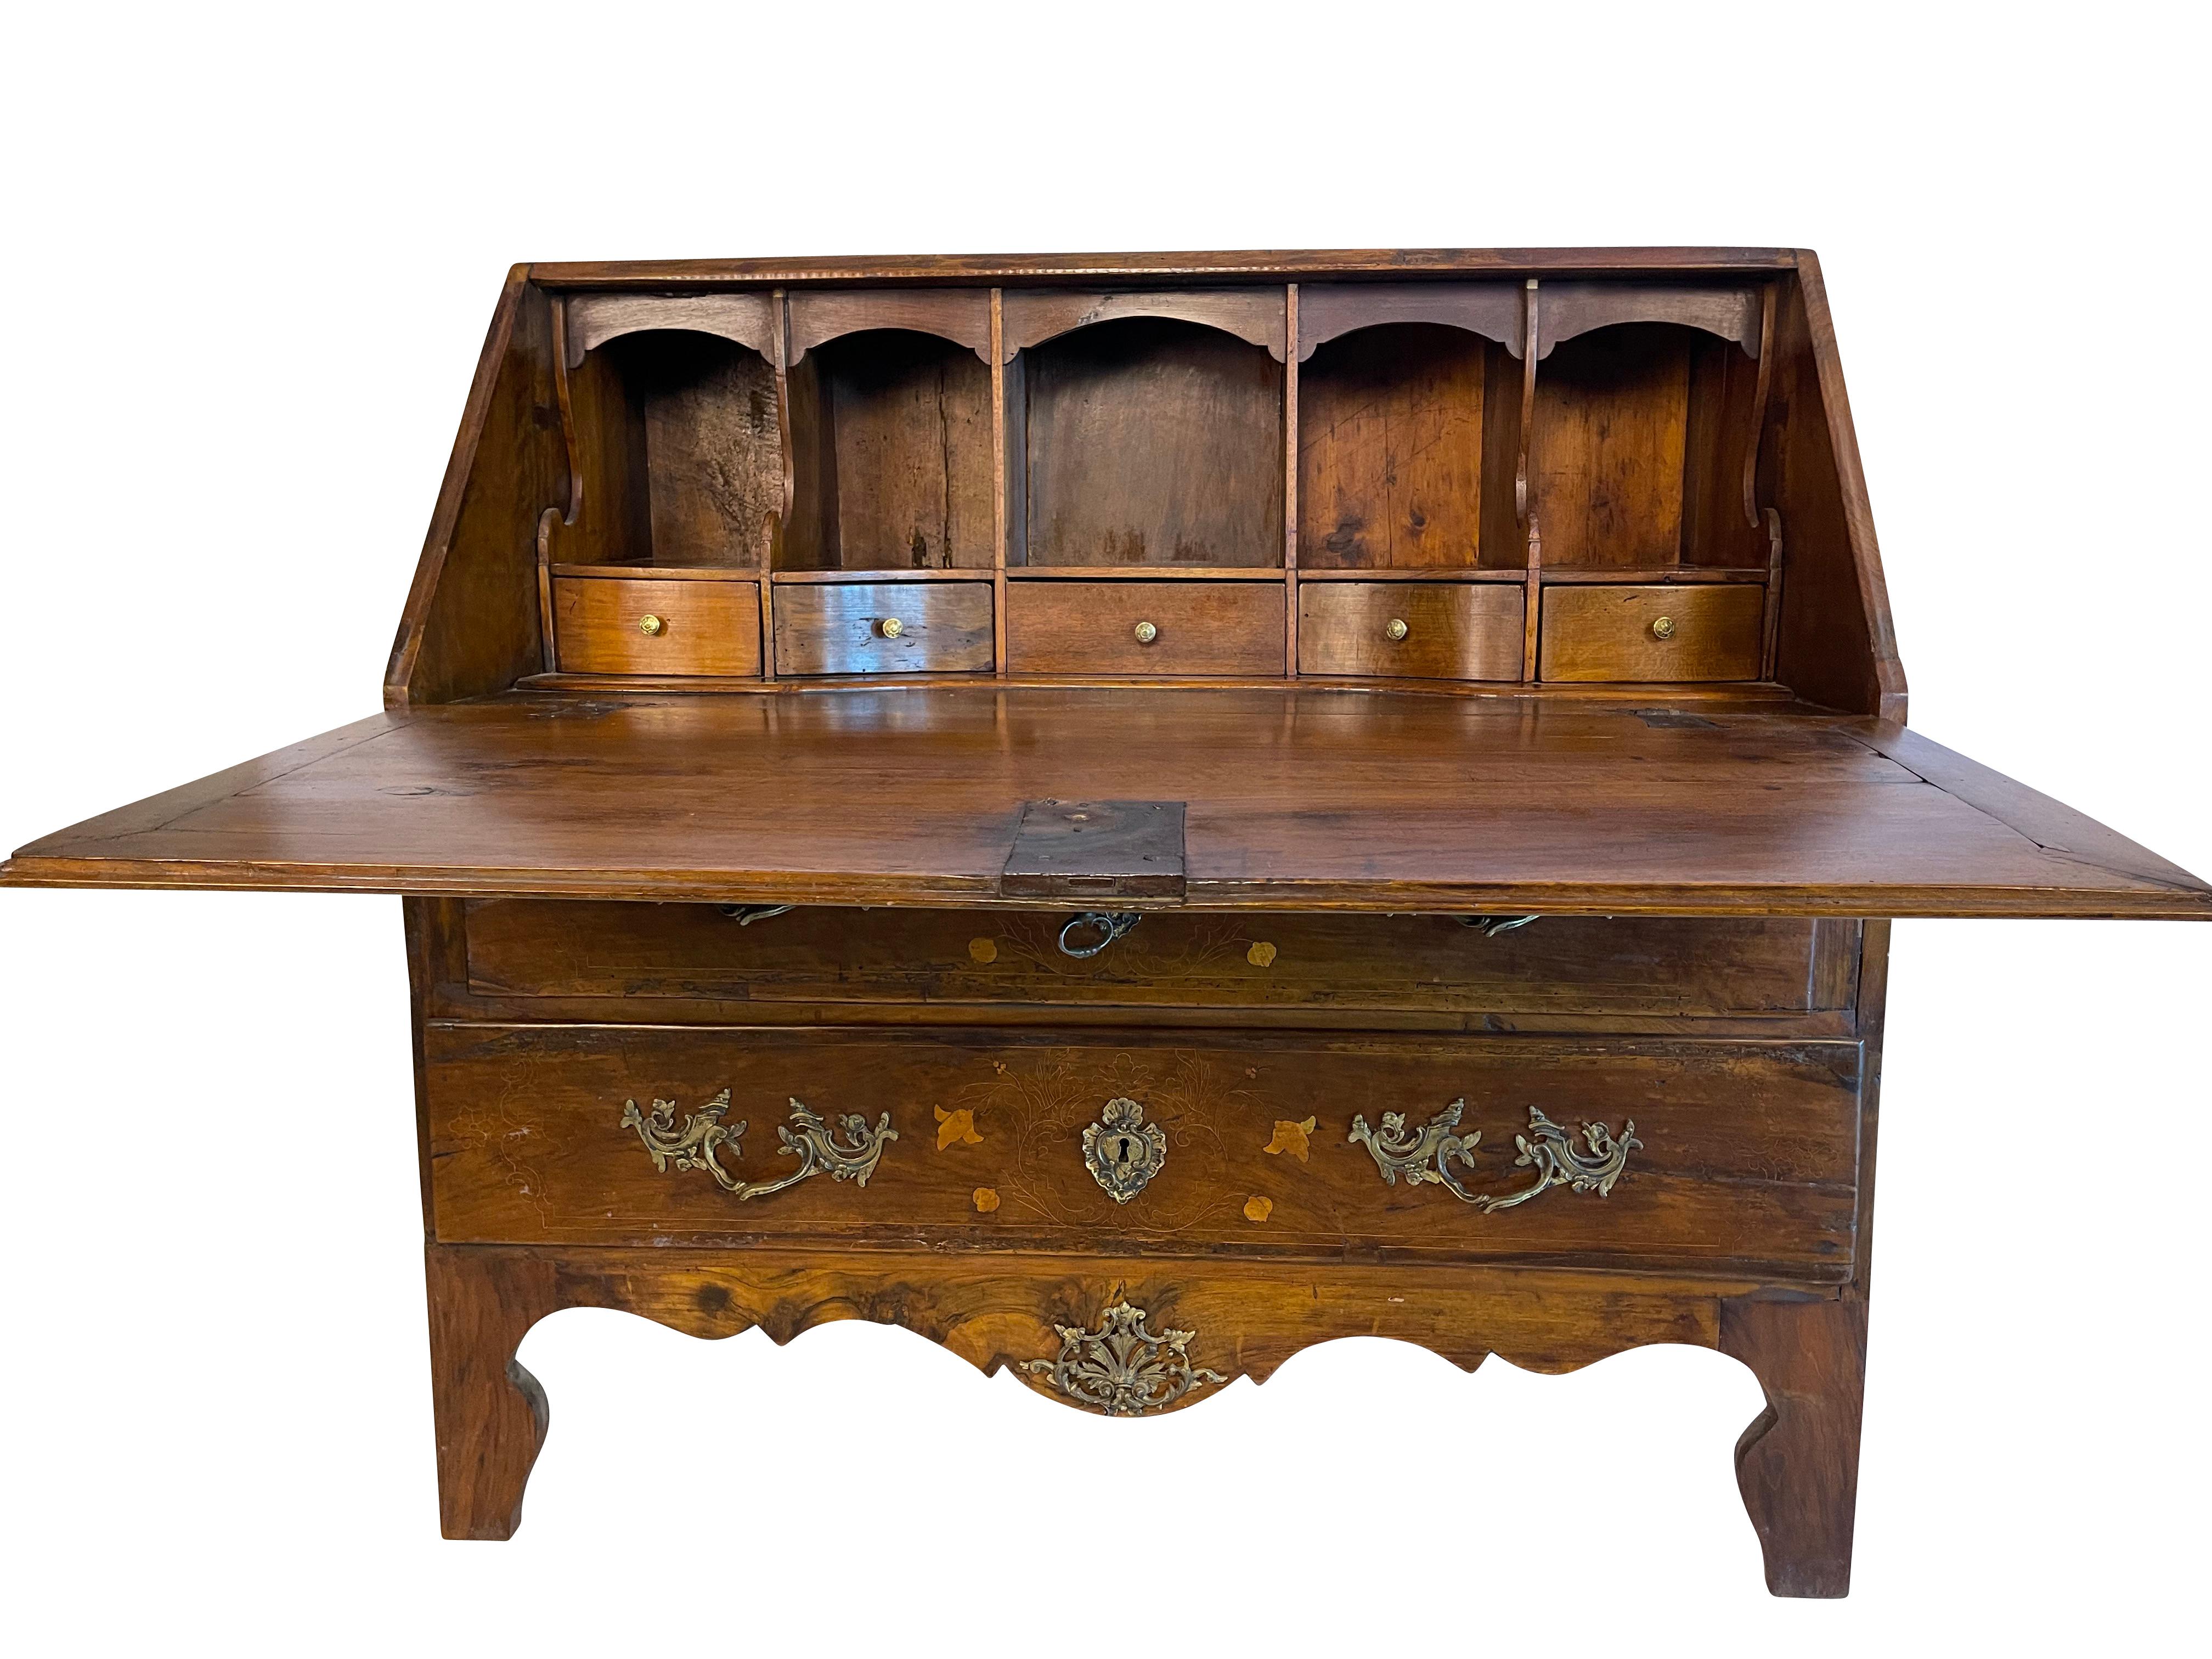 A stunning French solid walnut commode with a fold-down secretary desk housed in its top drawer. The secretary is decorated with satinwood inlays throughout. The two drawer fronts have elegant brass pulls and decorative escutcheons. The top